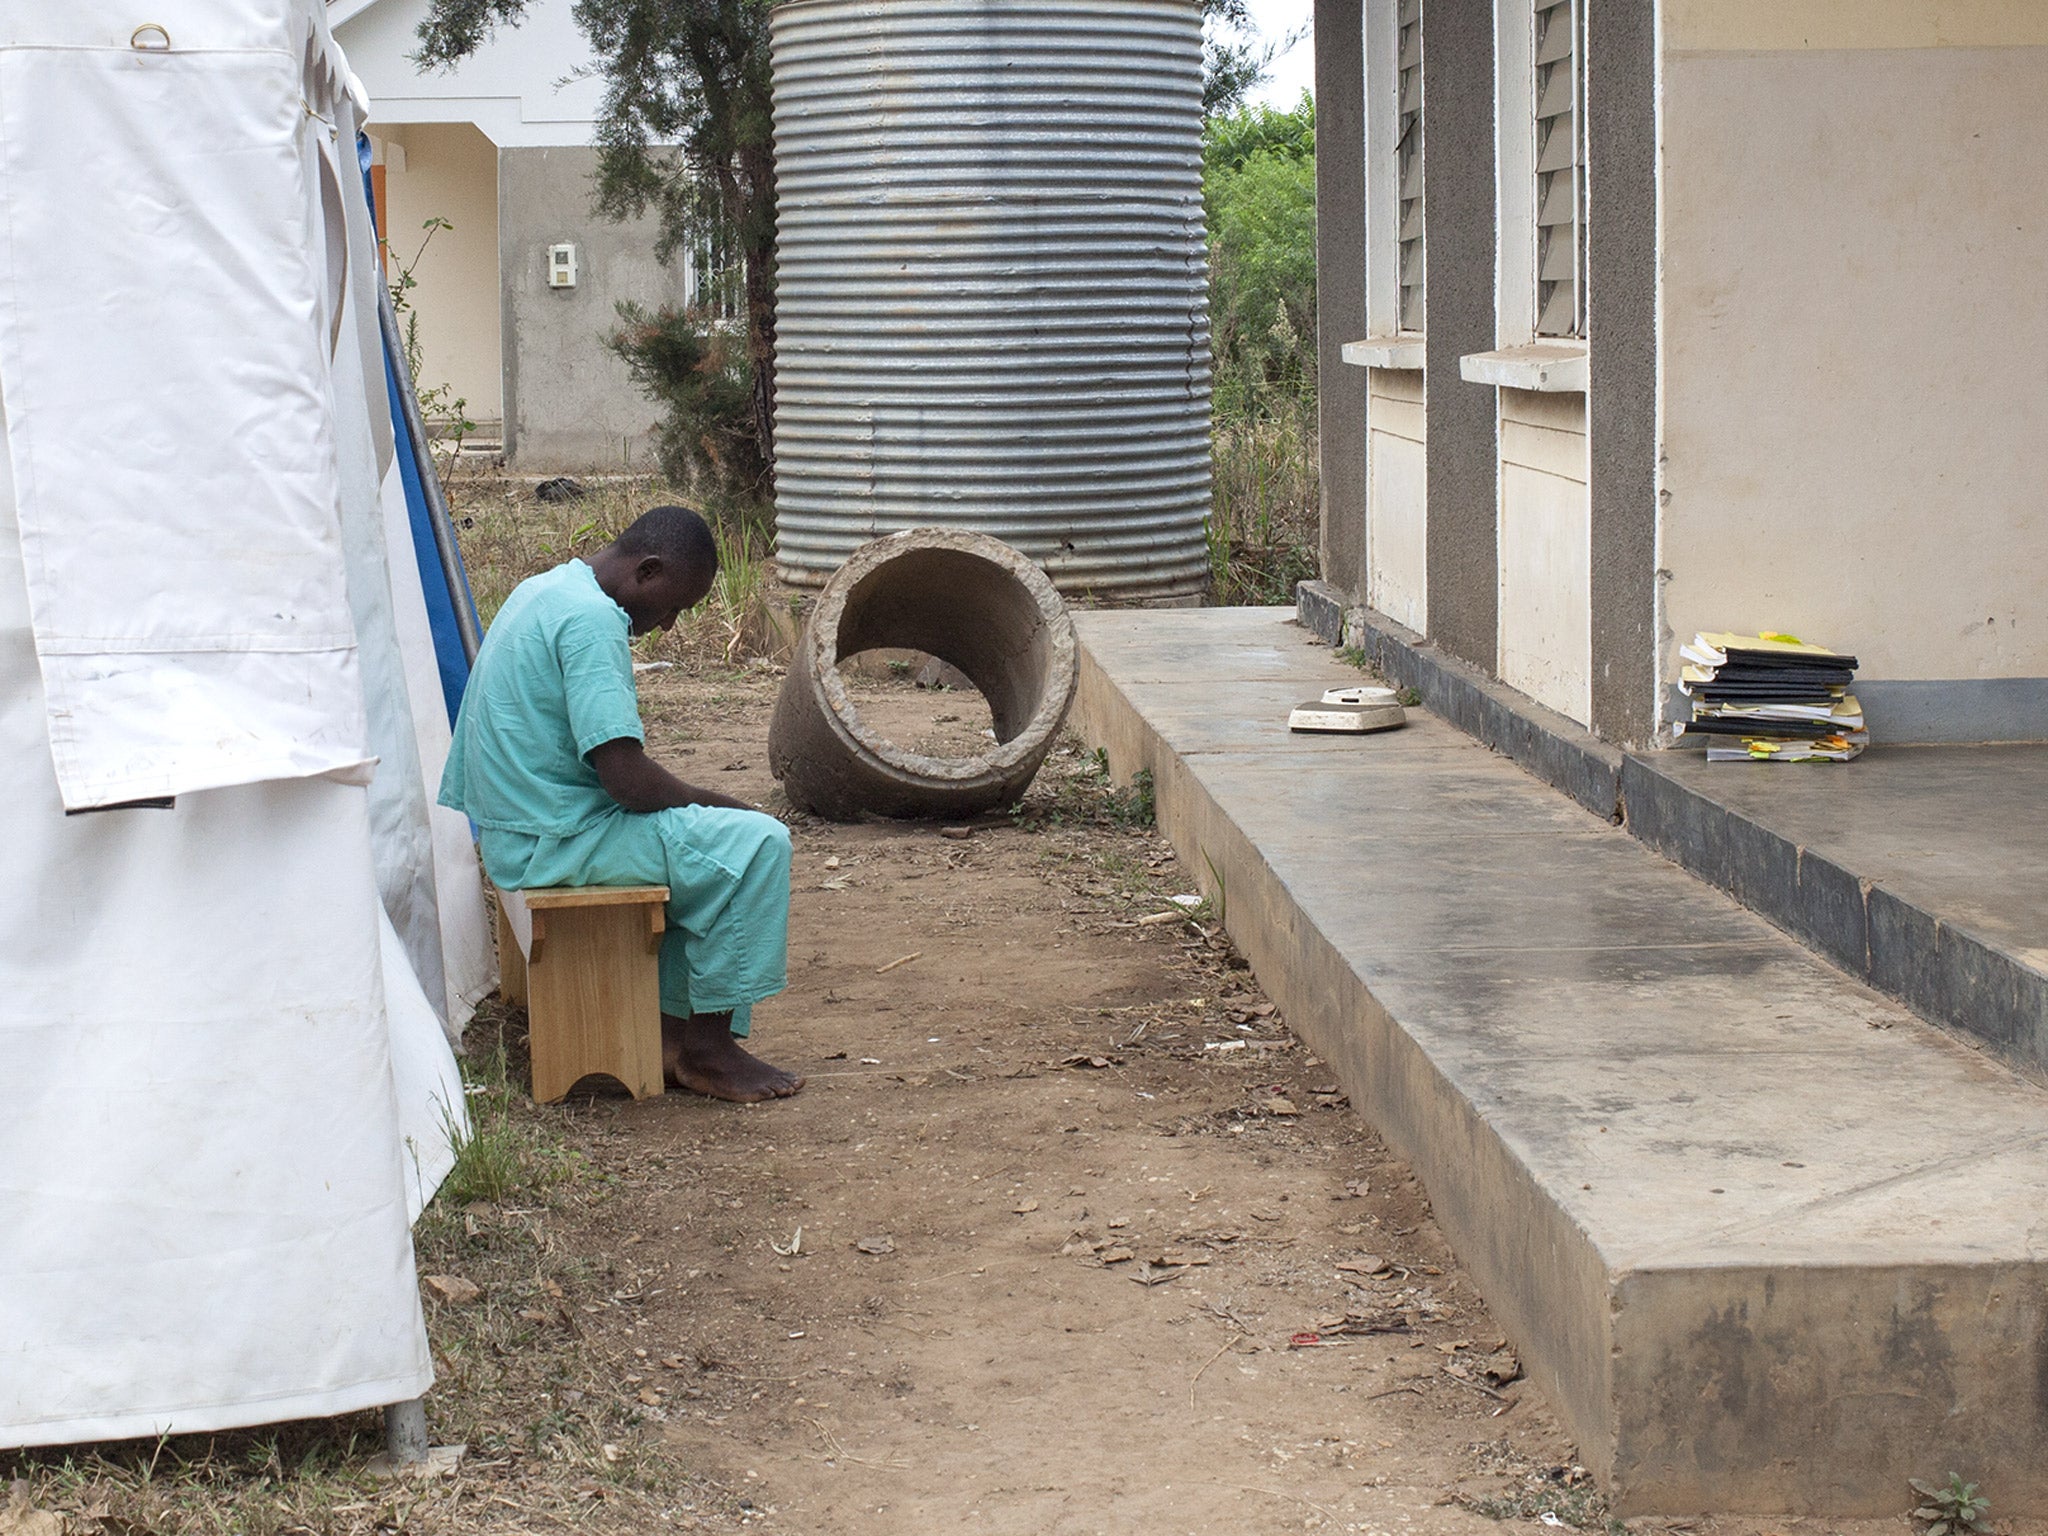 A patient waits for his circumcision in Uganda